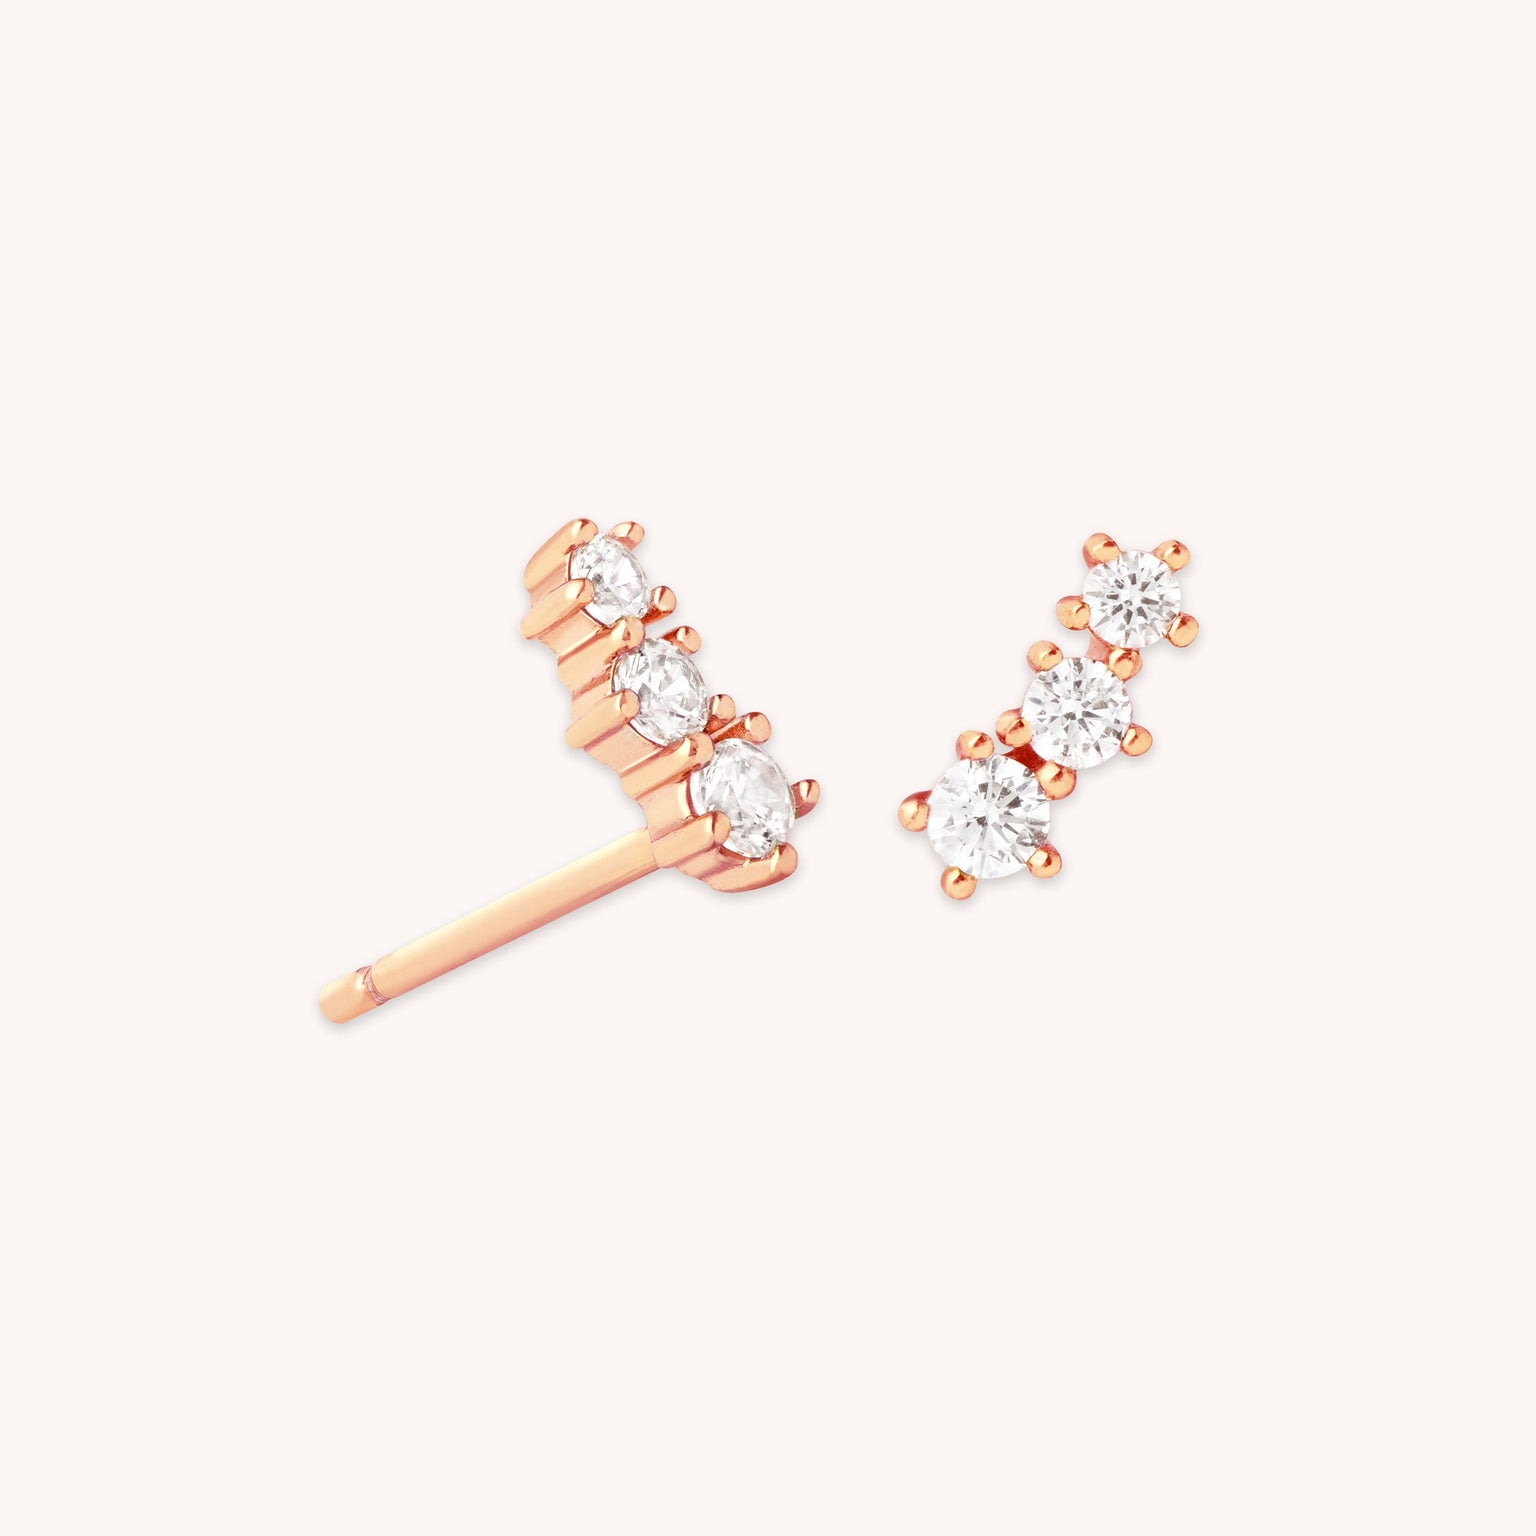 Glimmer Crystal Climber Stud Earrings in Rose Gold